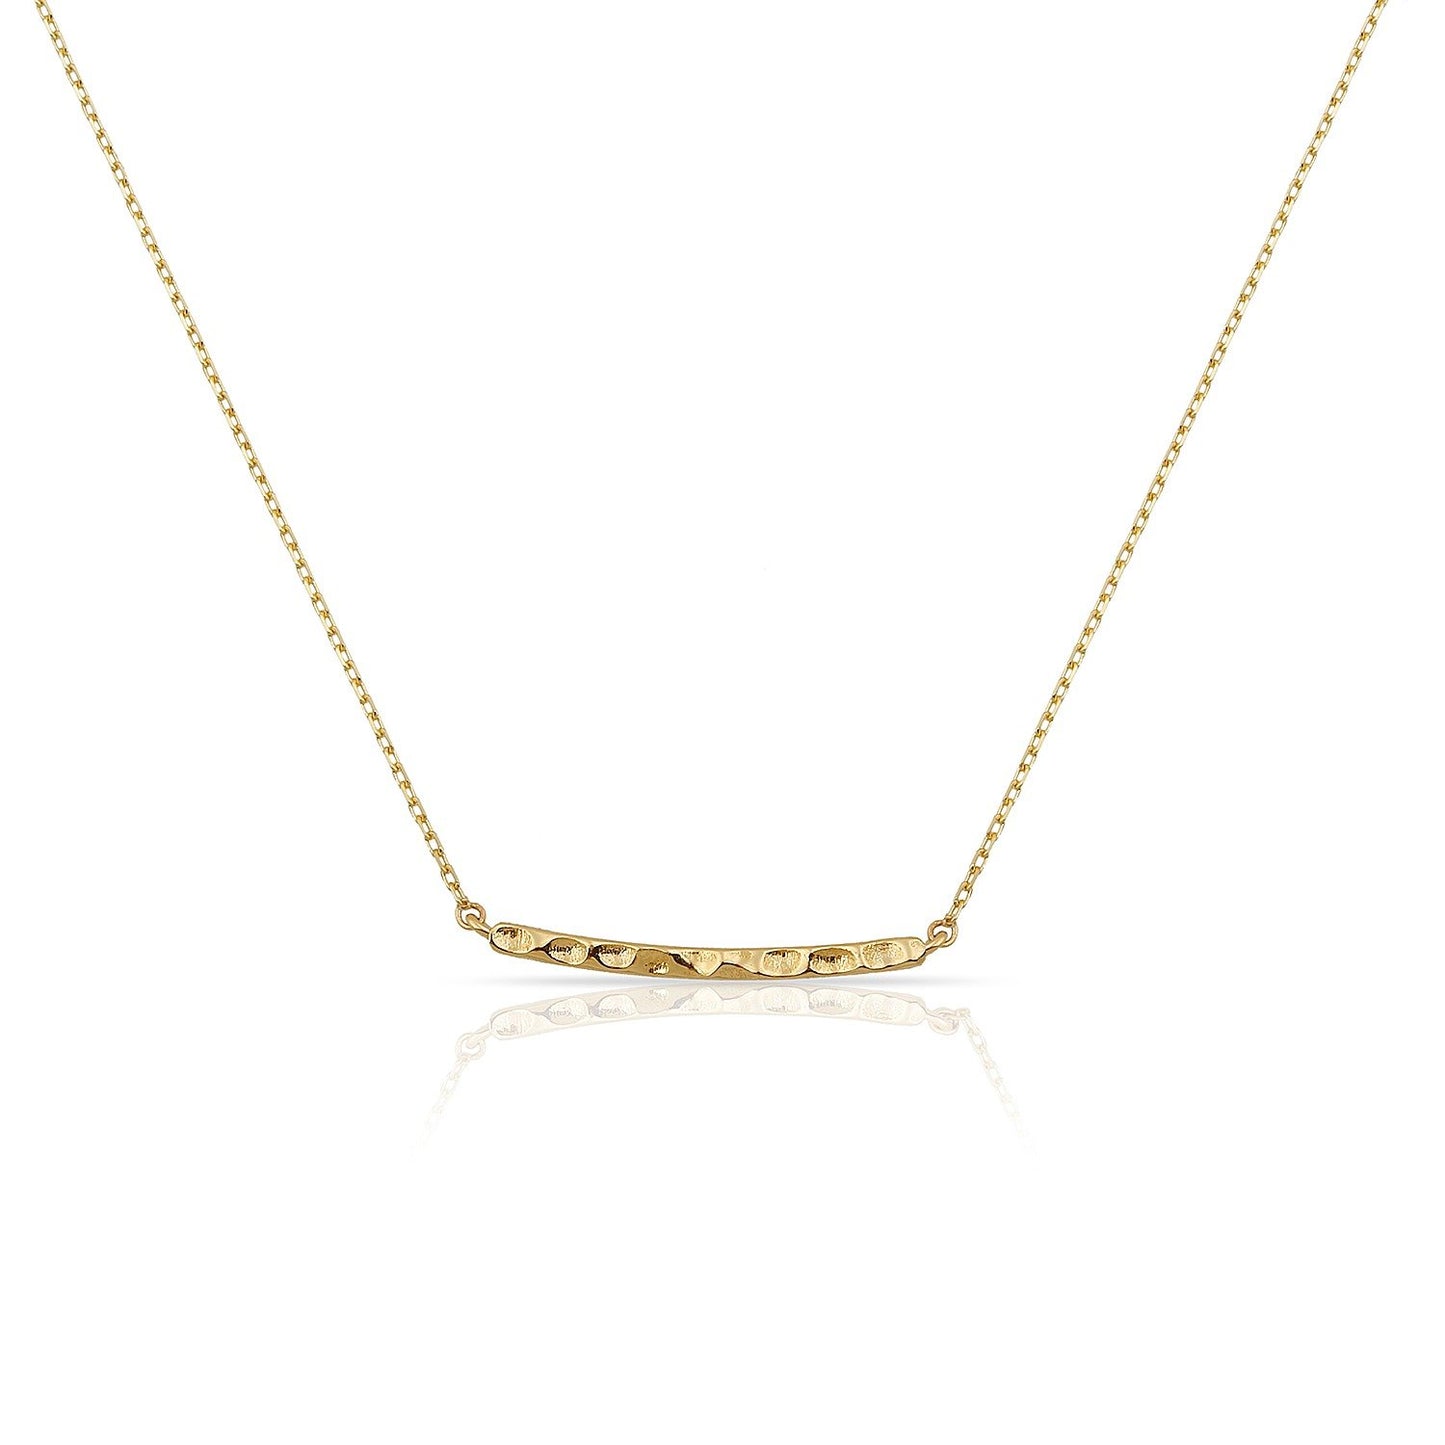 TSK Loverly Hammered Gold Bar Necklace JEWELRY The Sis Kiss 14k Gold